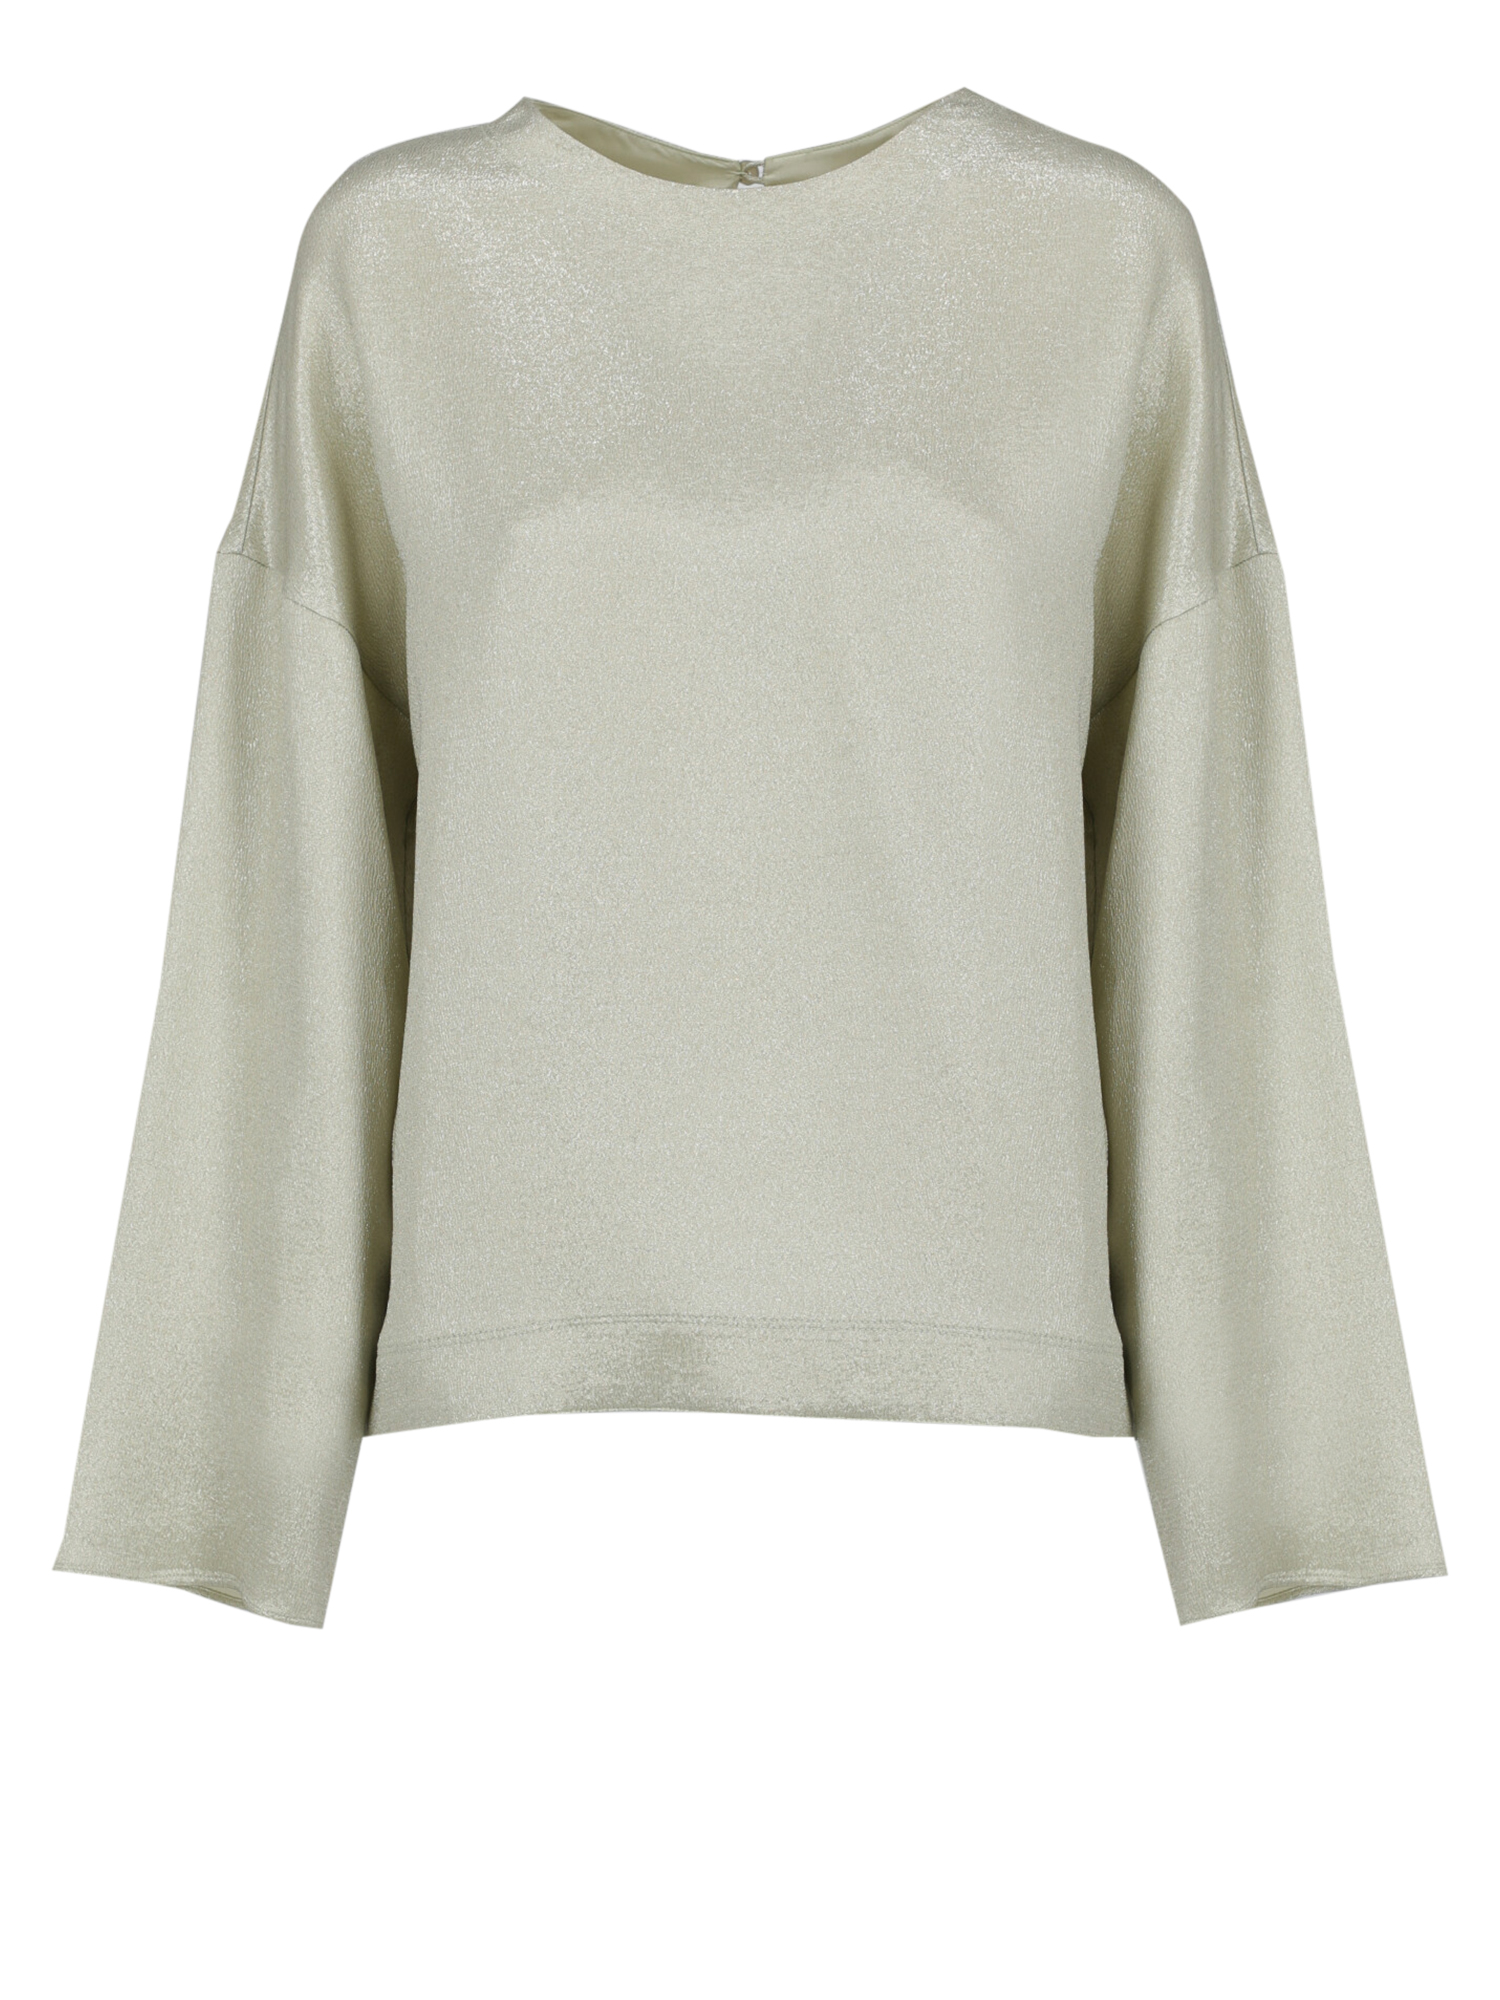 Valentino Femme T-shirts et tops Green Synthetic Fibers